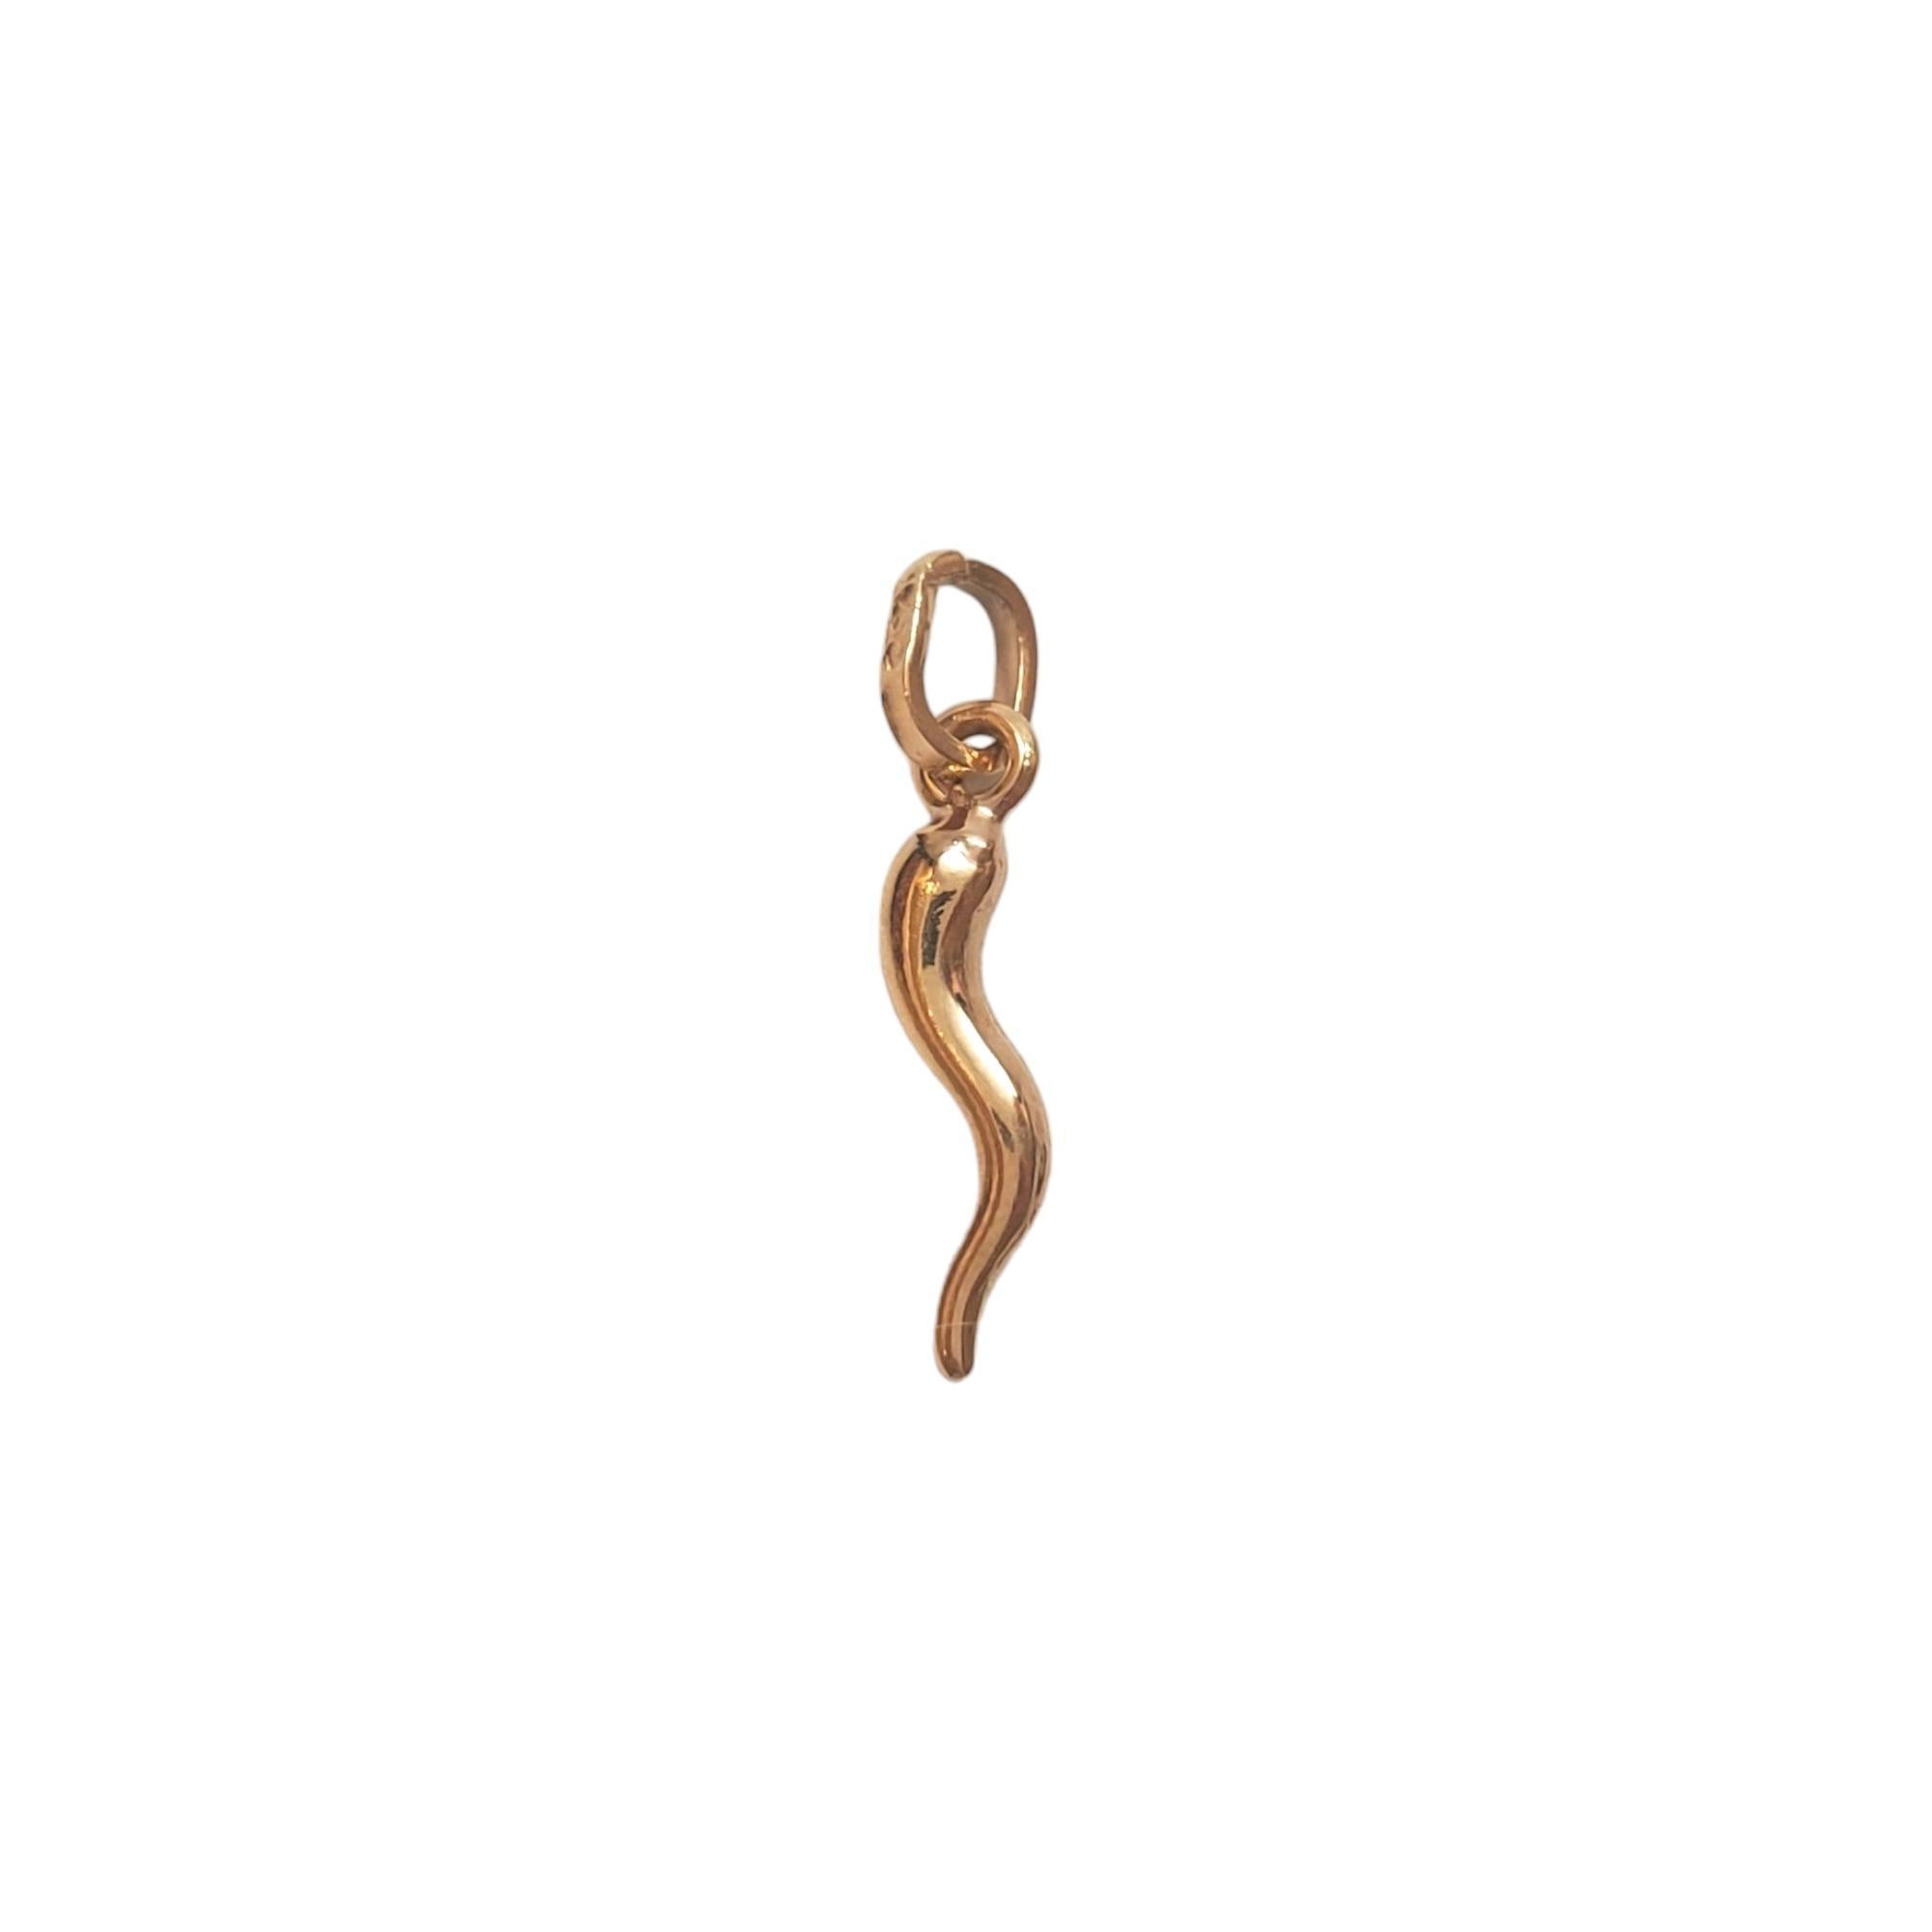 18K Yellow Gold Italian Horn Charm Pendant

This traditional Italian horn charm is a symbol of good luck and protection from harm in 18K yellow gold.

Hallmark: 750

Weight: 0.43 dwt/0.74 g

Length w/ bail: 22.13 mm

Size: 17.85 mm X 4.05 mm X 2.86